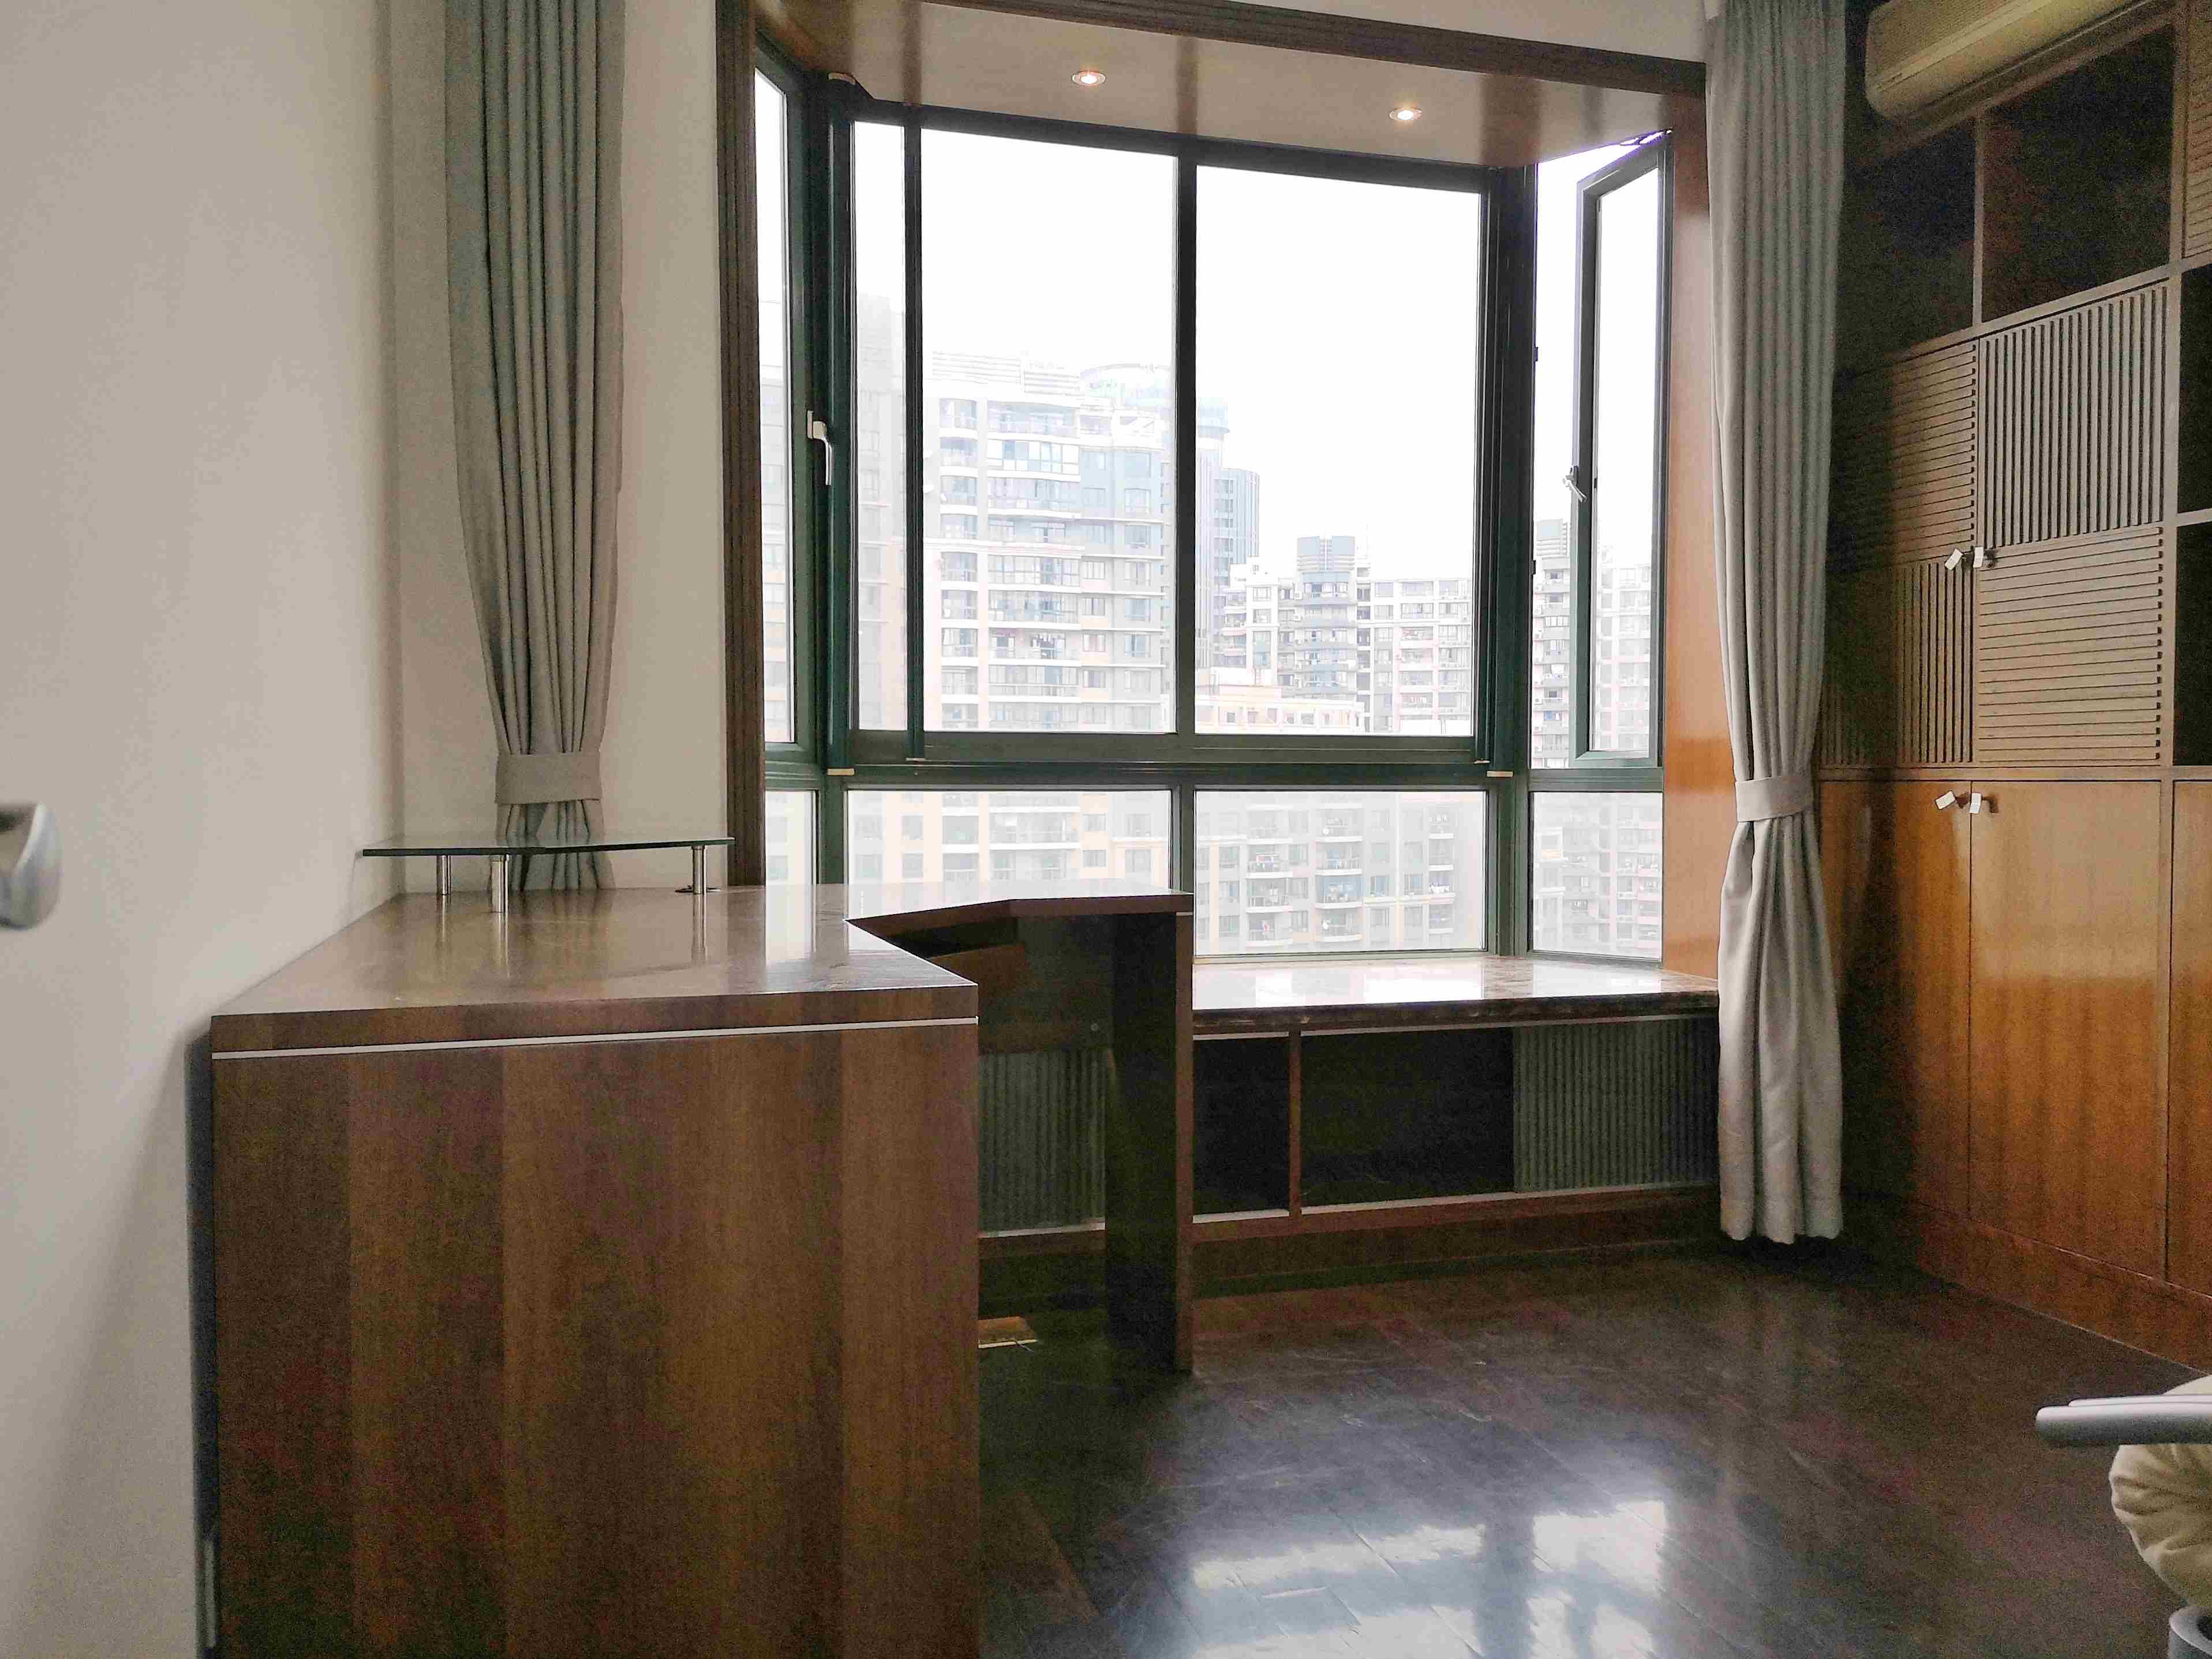 Office Space Bright Spacious 3BR Apt for Rent nr Suzhou Creek in Shanghai